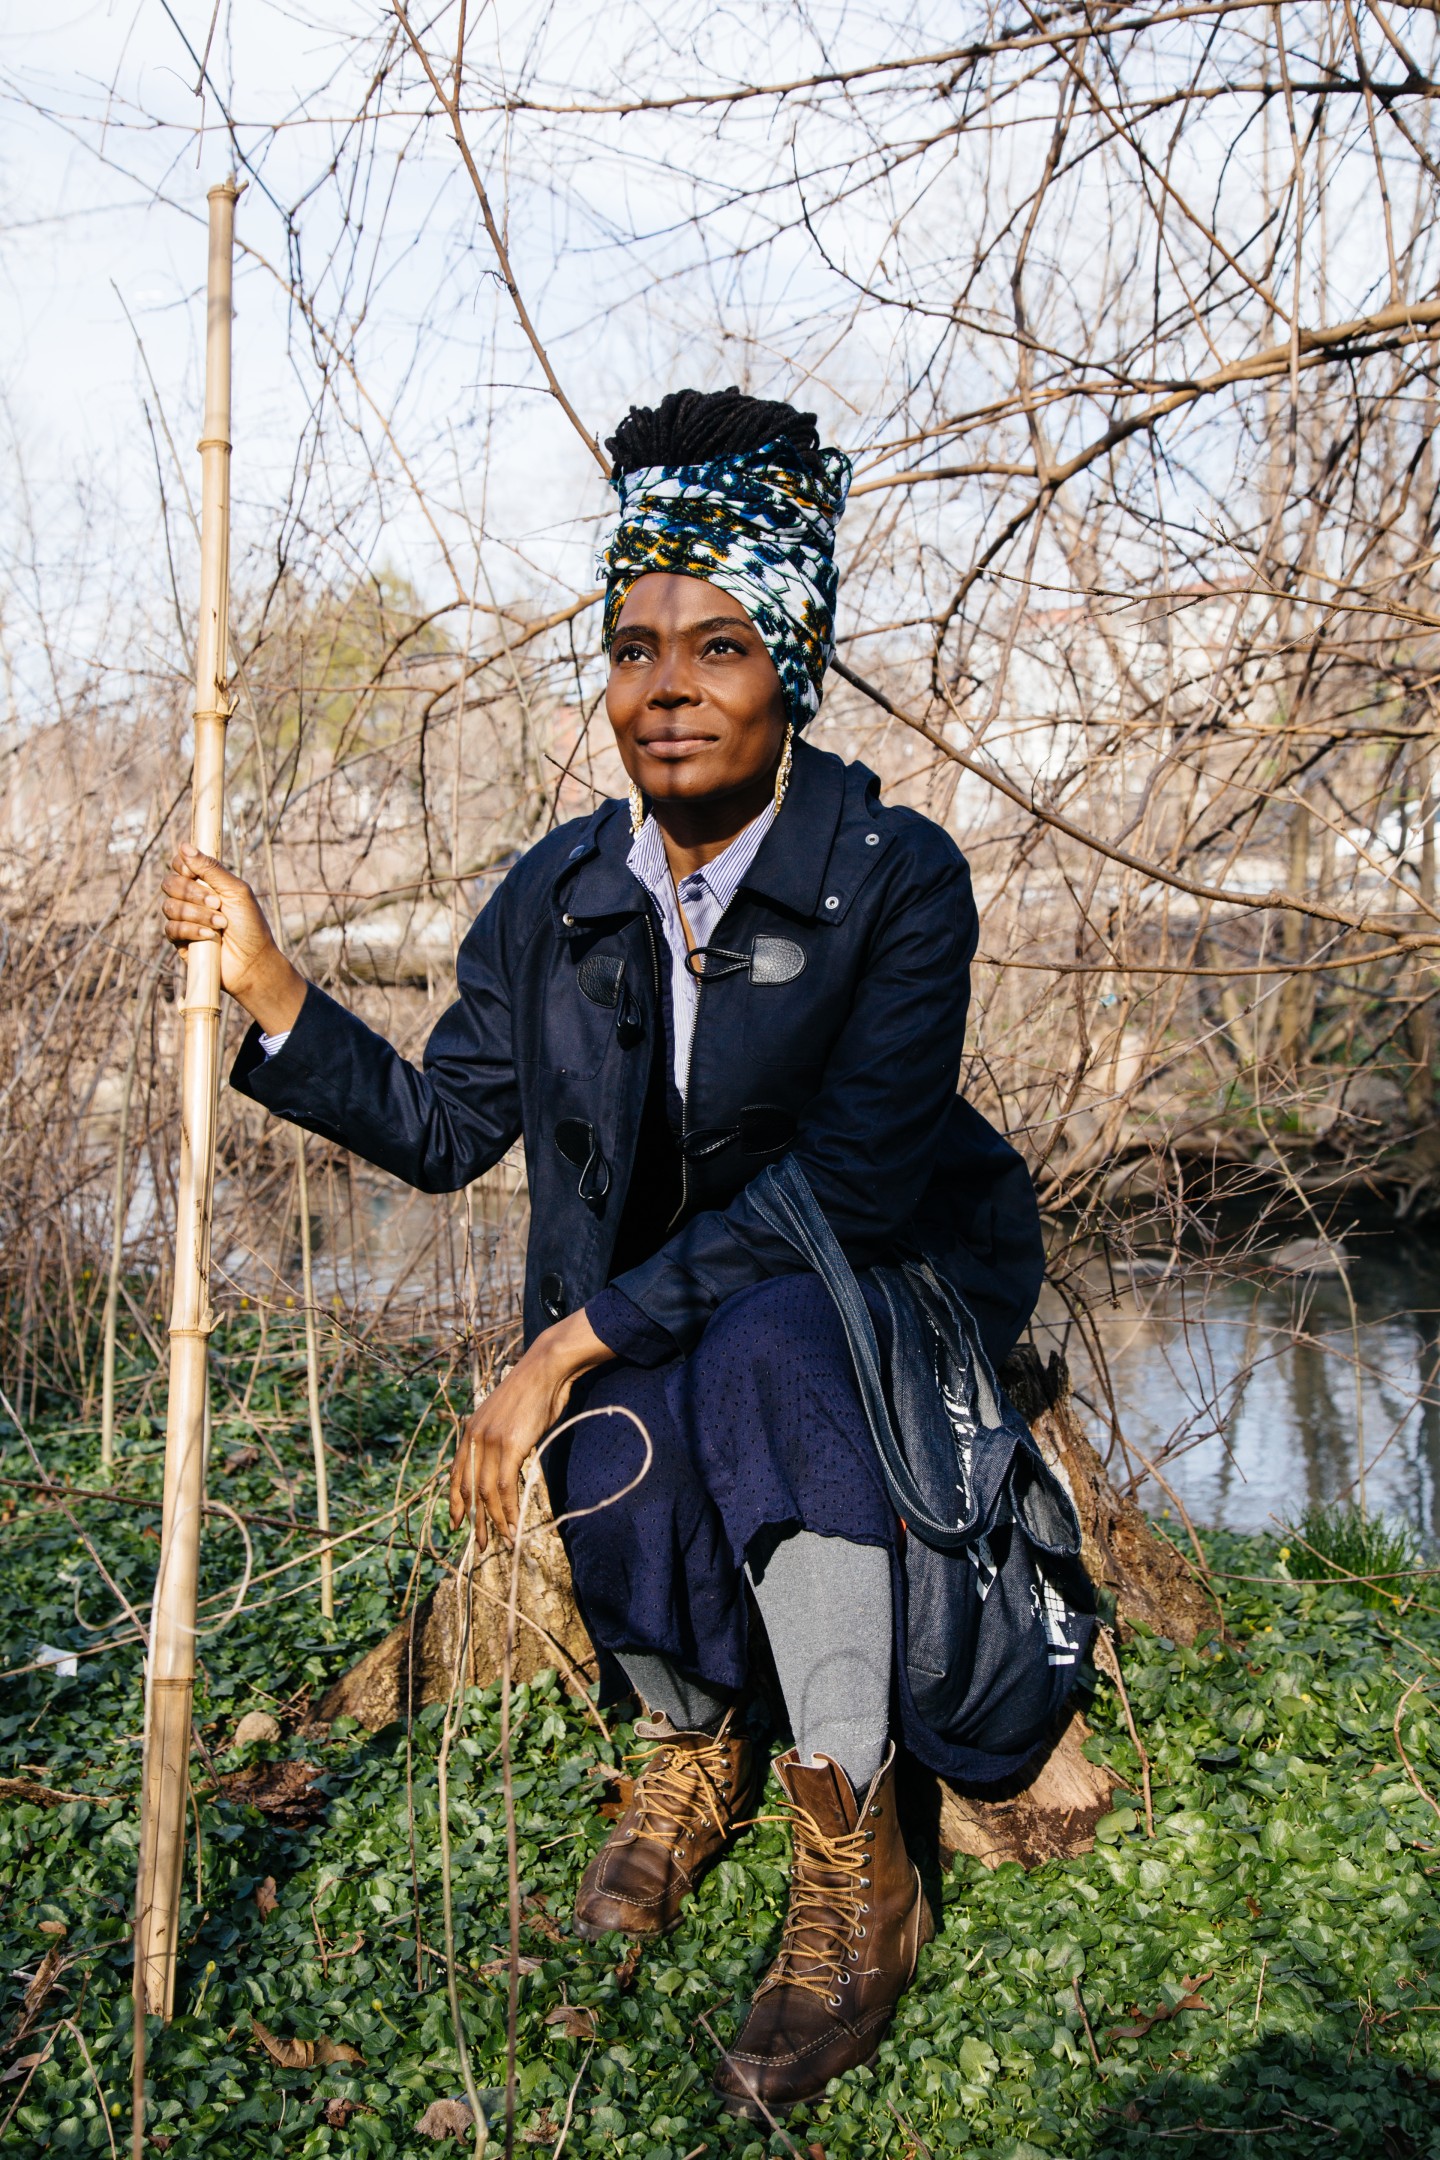 These New York Gardeners Are Fighting The System By Growing Food